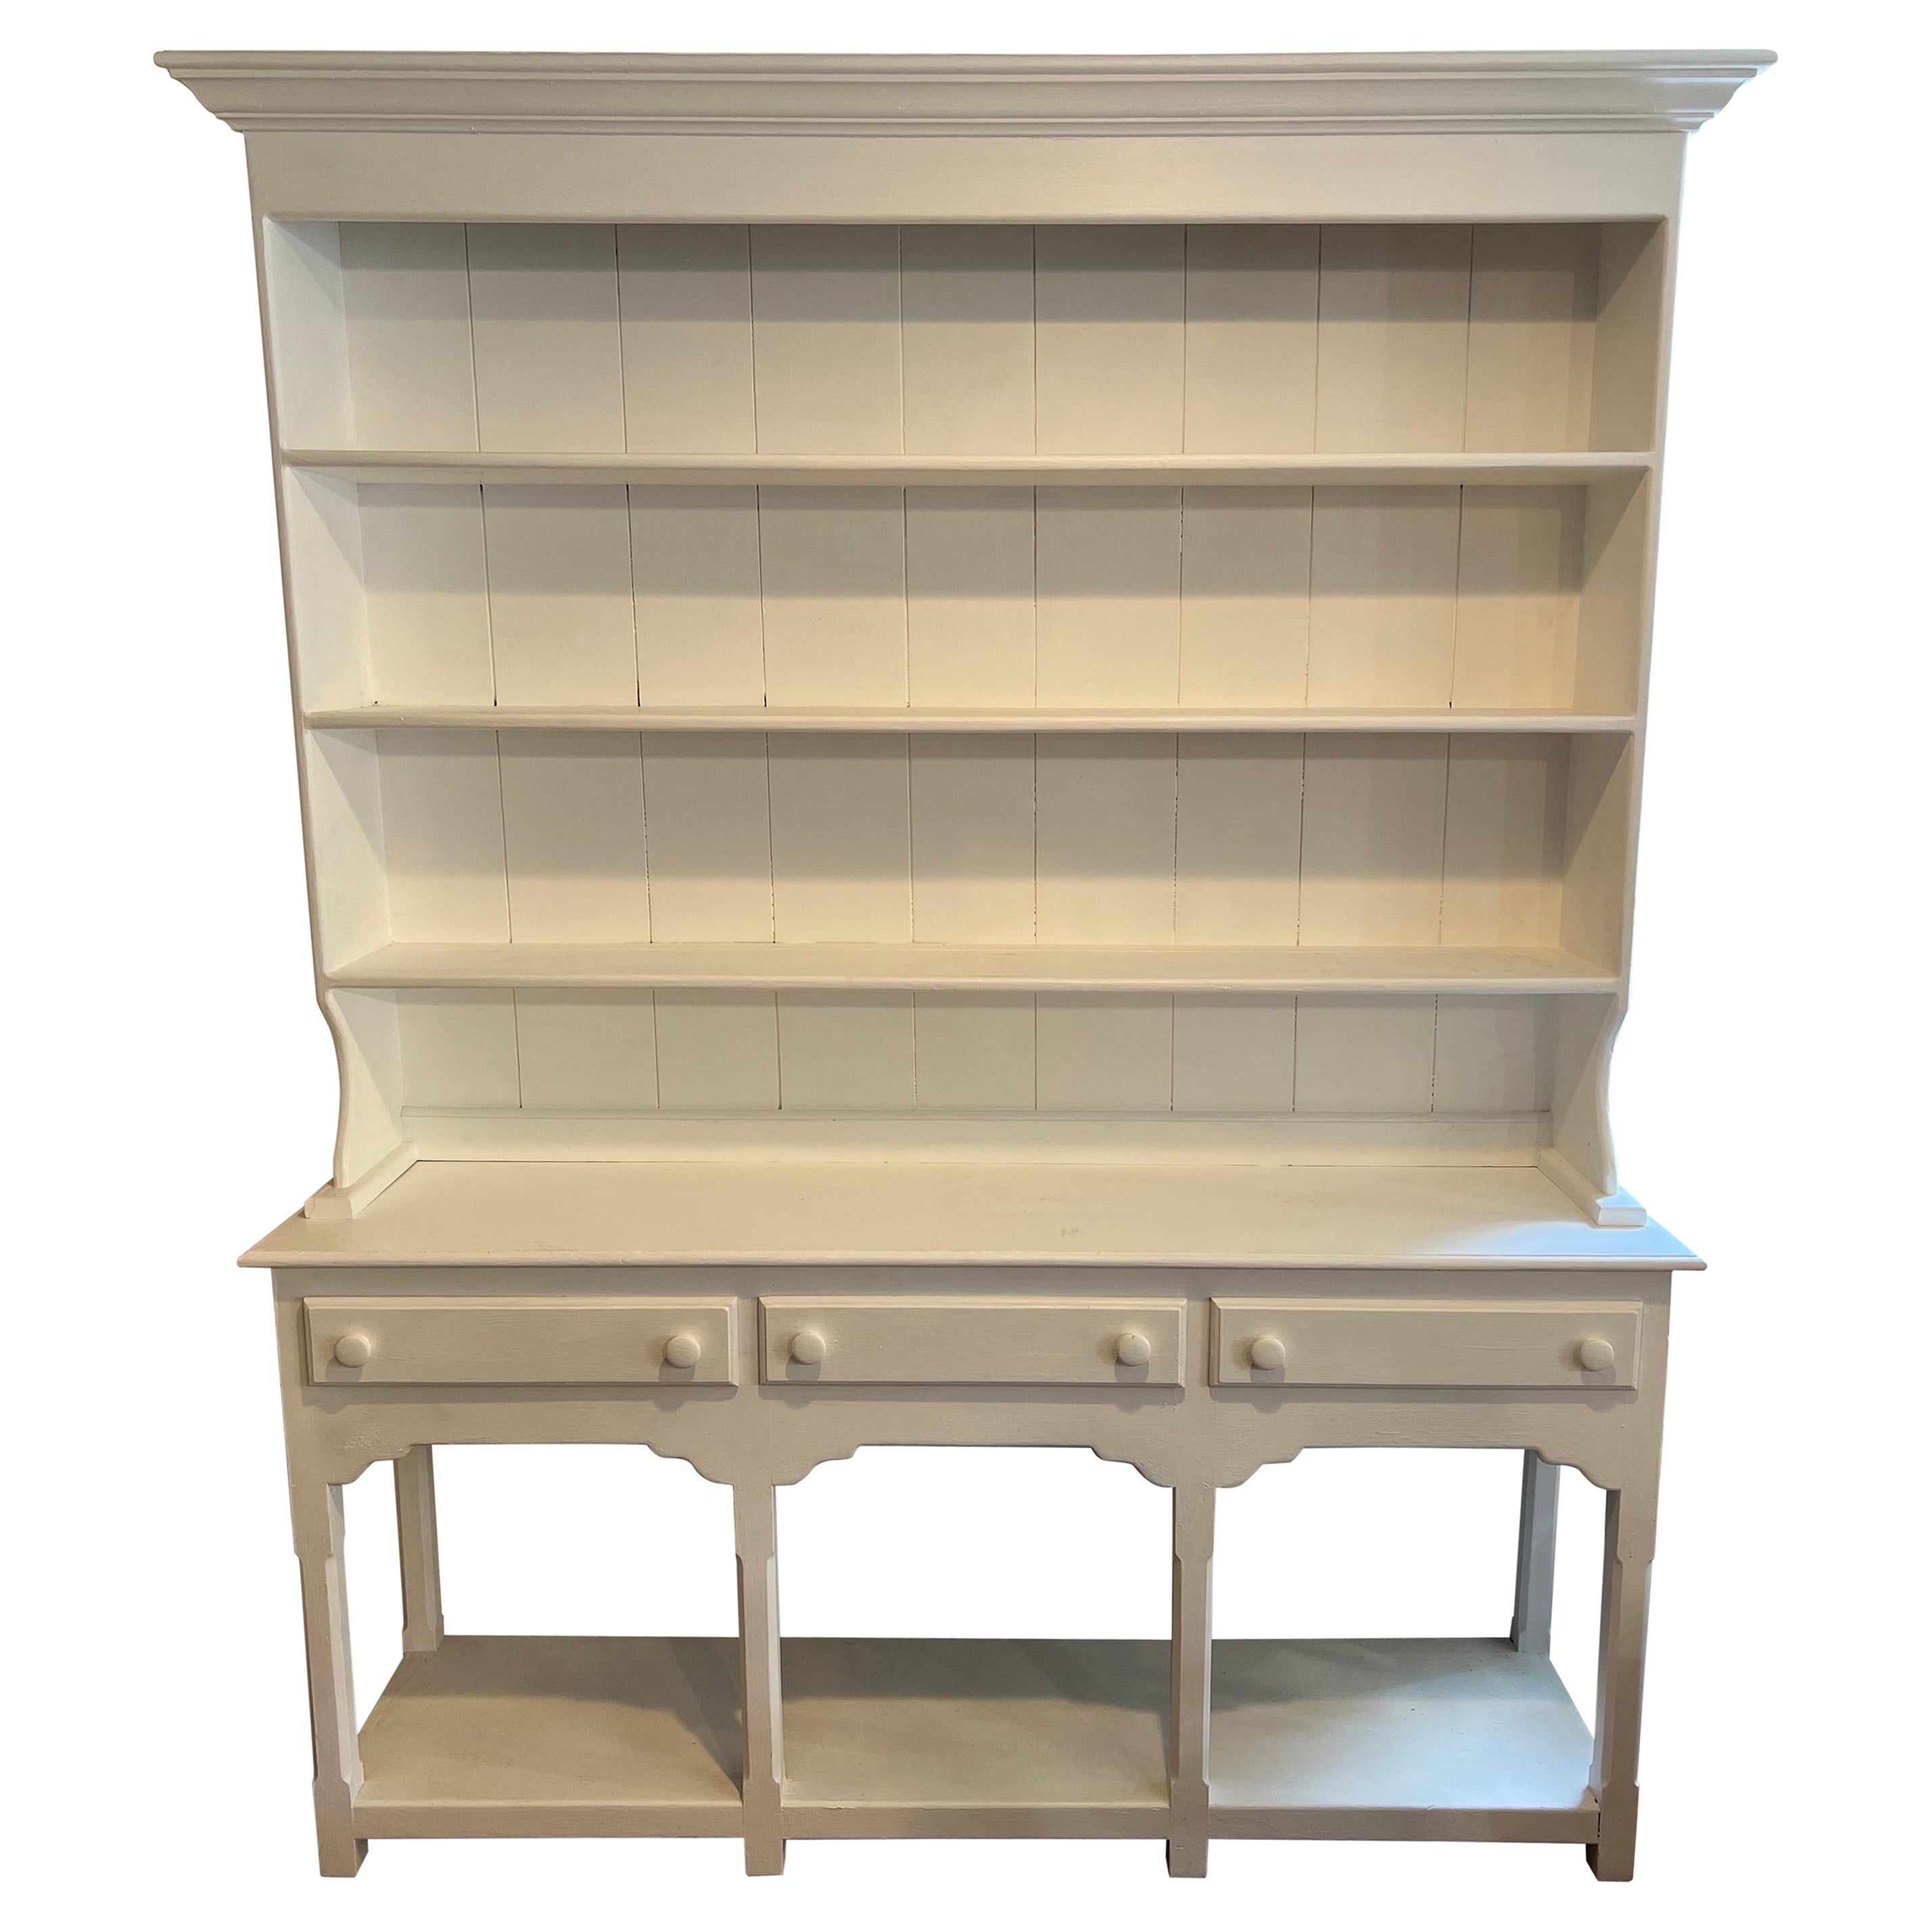 Large White Chalk Paint Hutch with Drawers